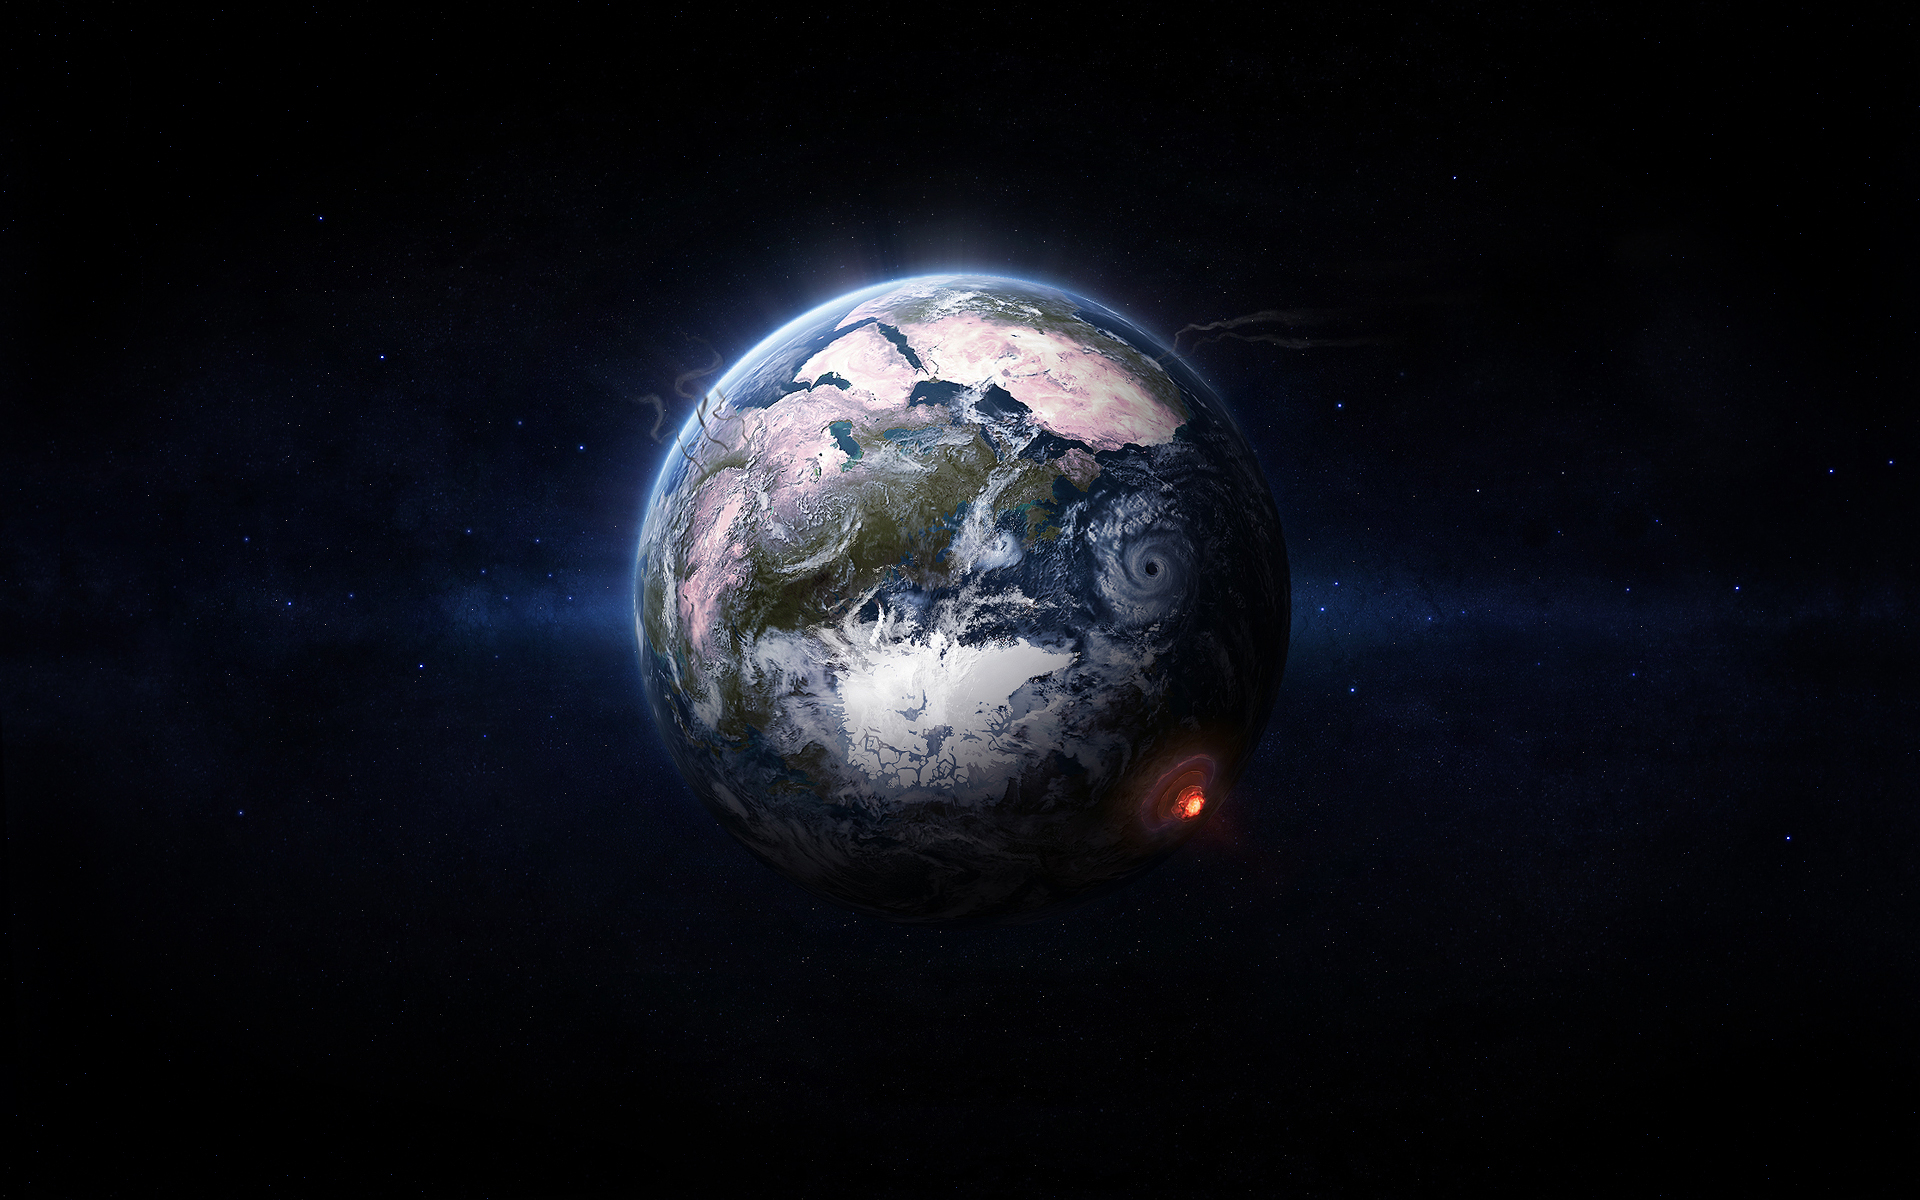 outer space, planets, Earth - desktop wallpaper